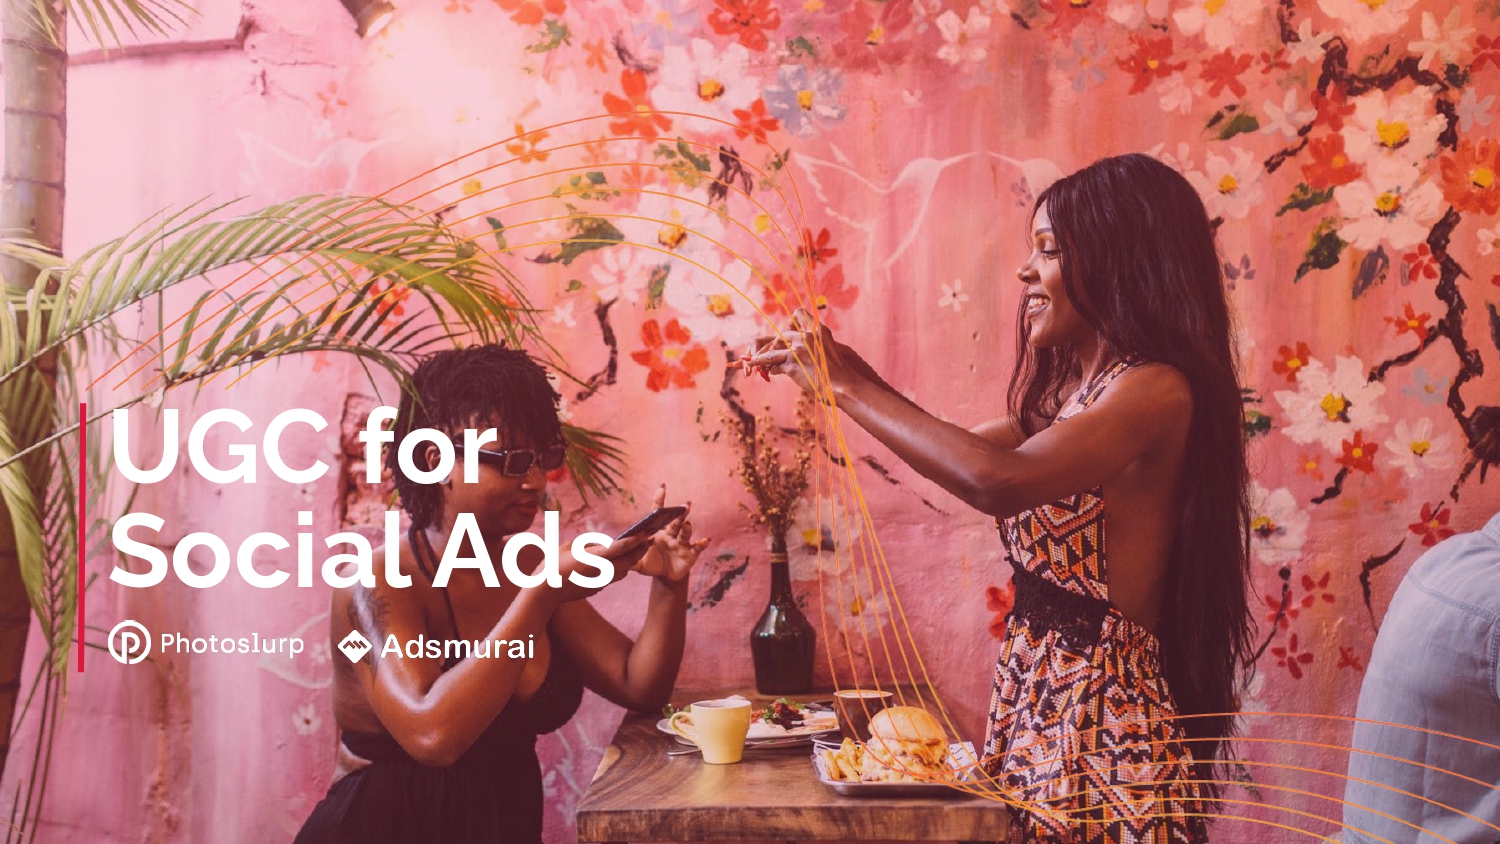 [Webinar] How to boost your Social Ads campaigns with UGC